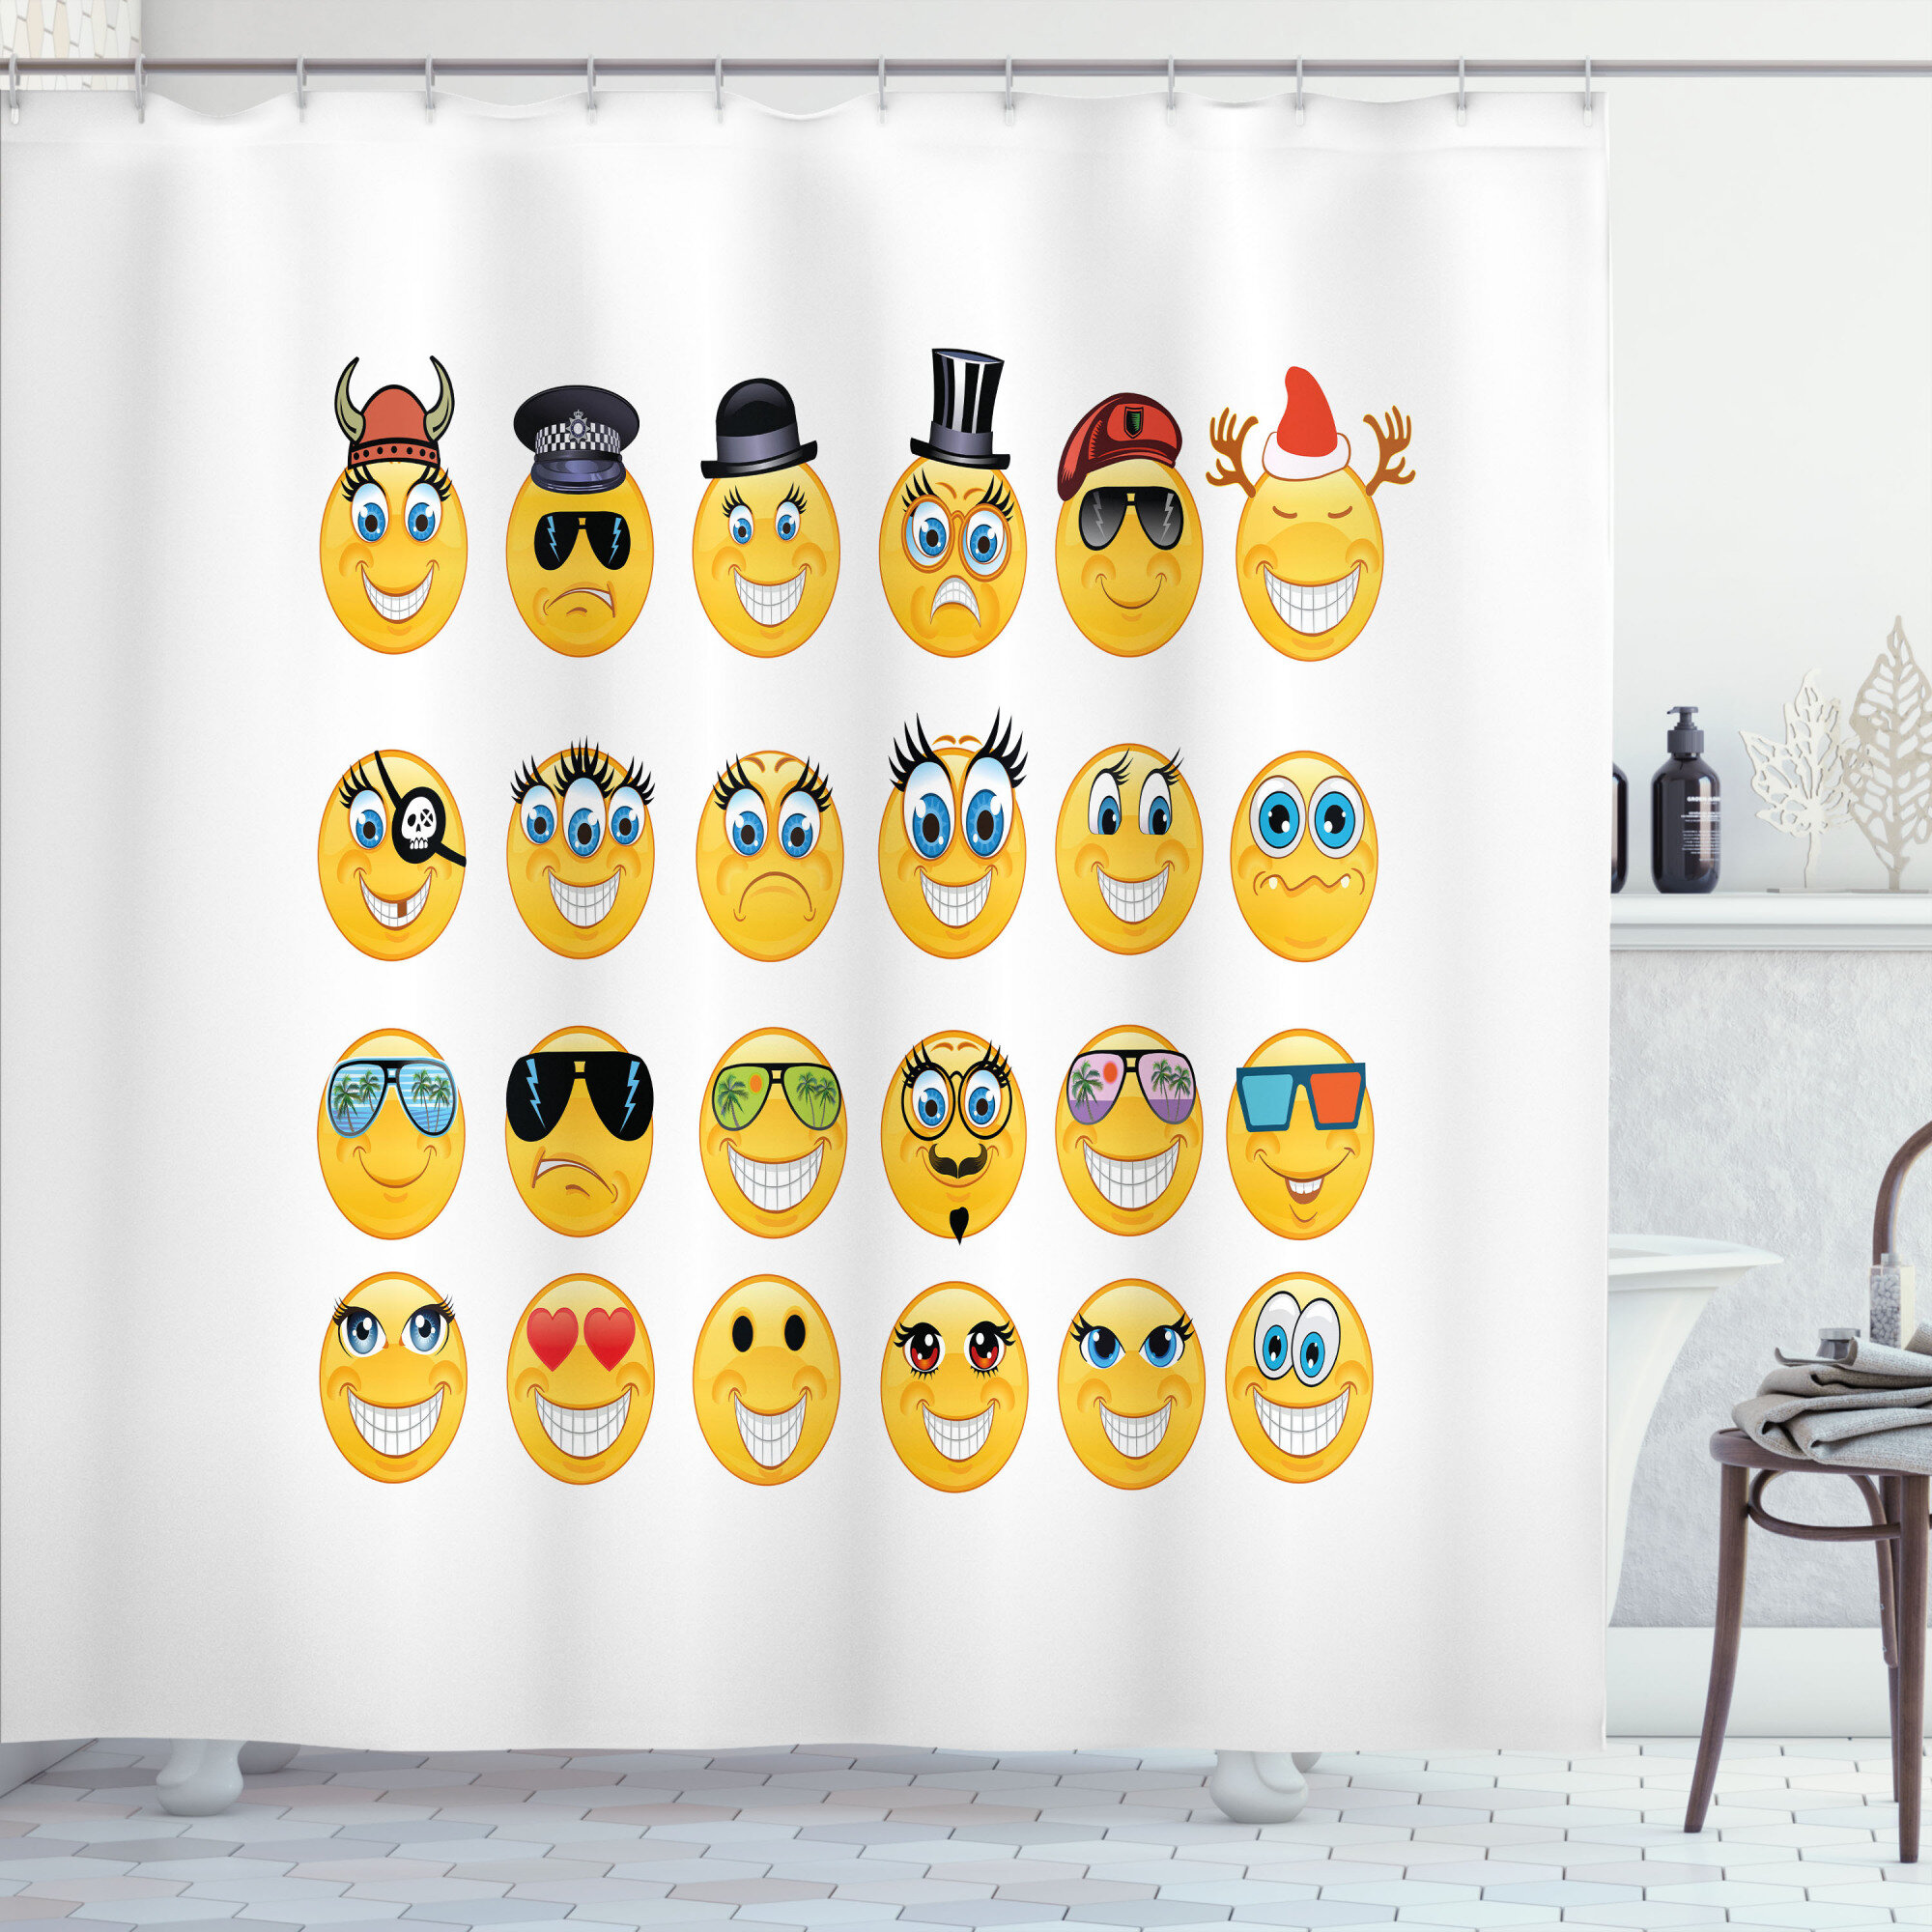 Details about   Colorful Emoji Shower Curtain Fabric Bathroom Decor Set with Hooks 4 Sizes 